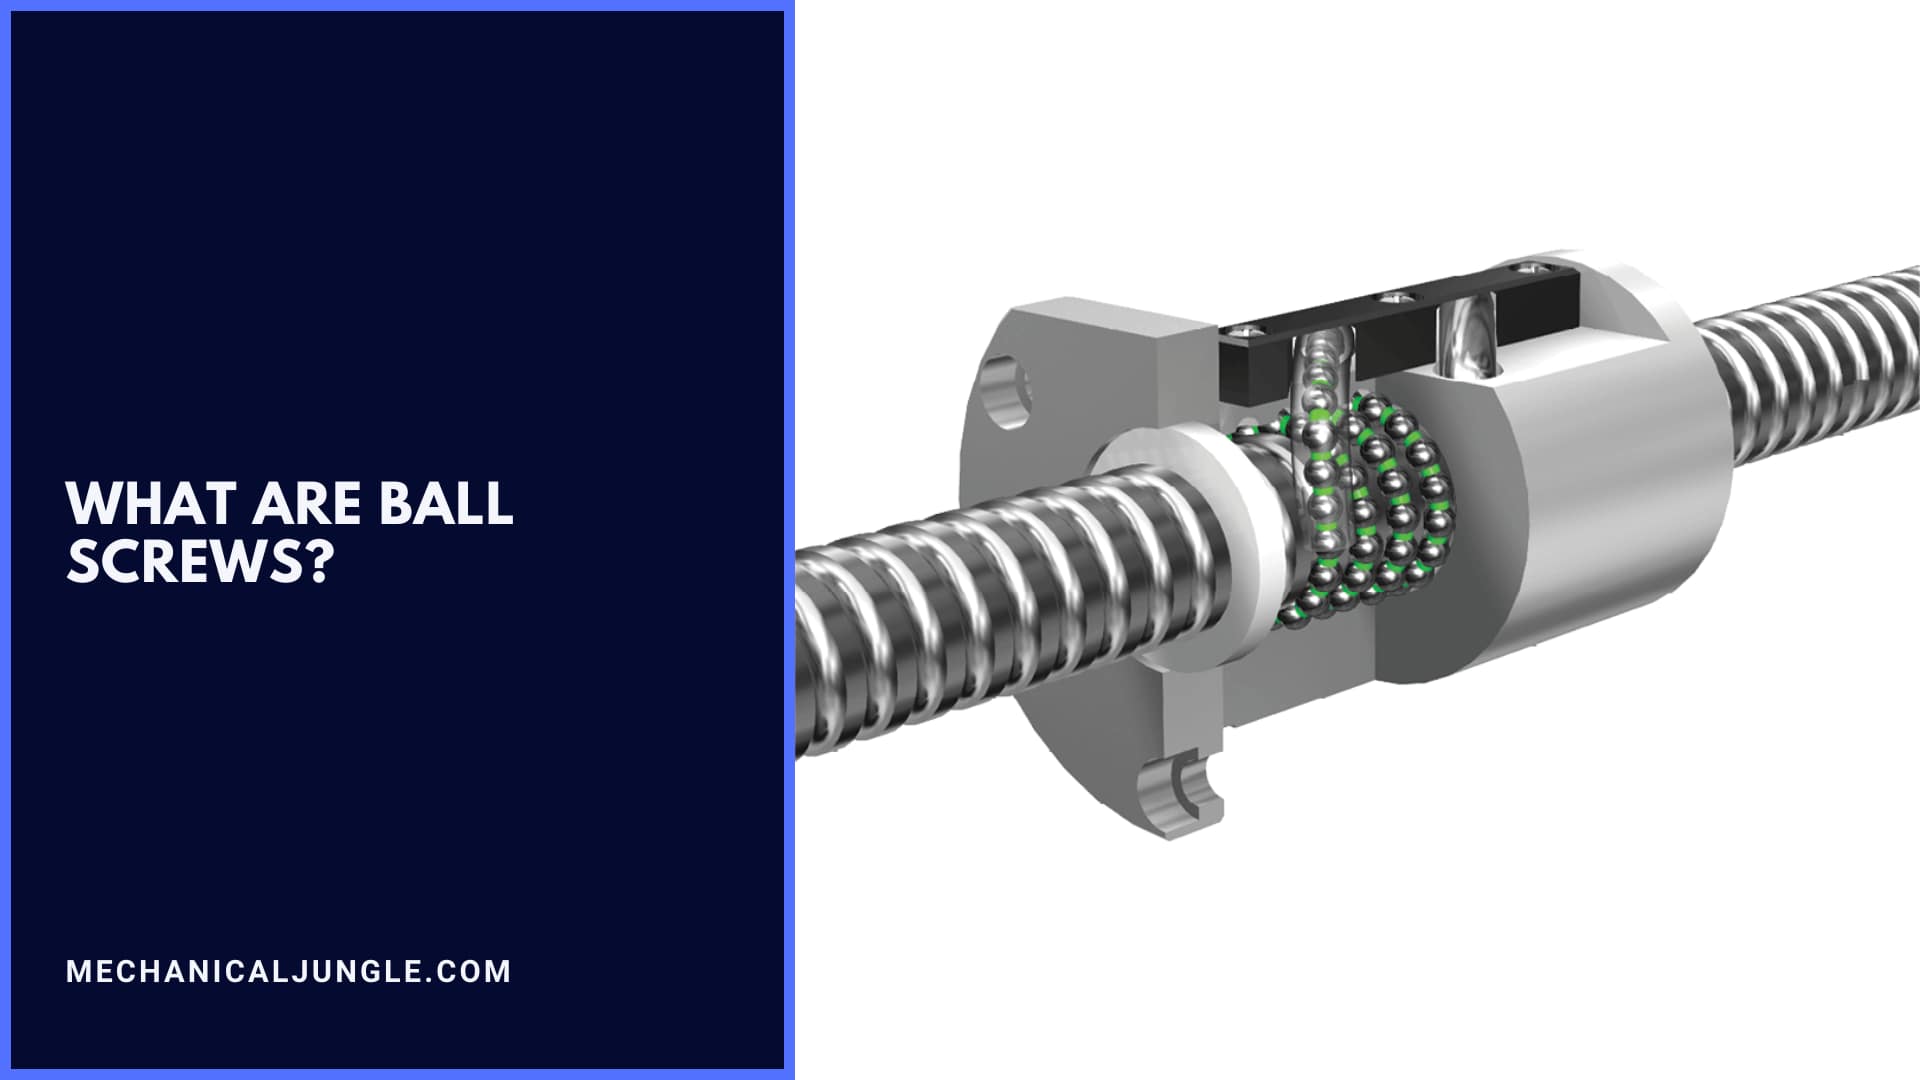 What Are Ball Screws?